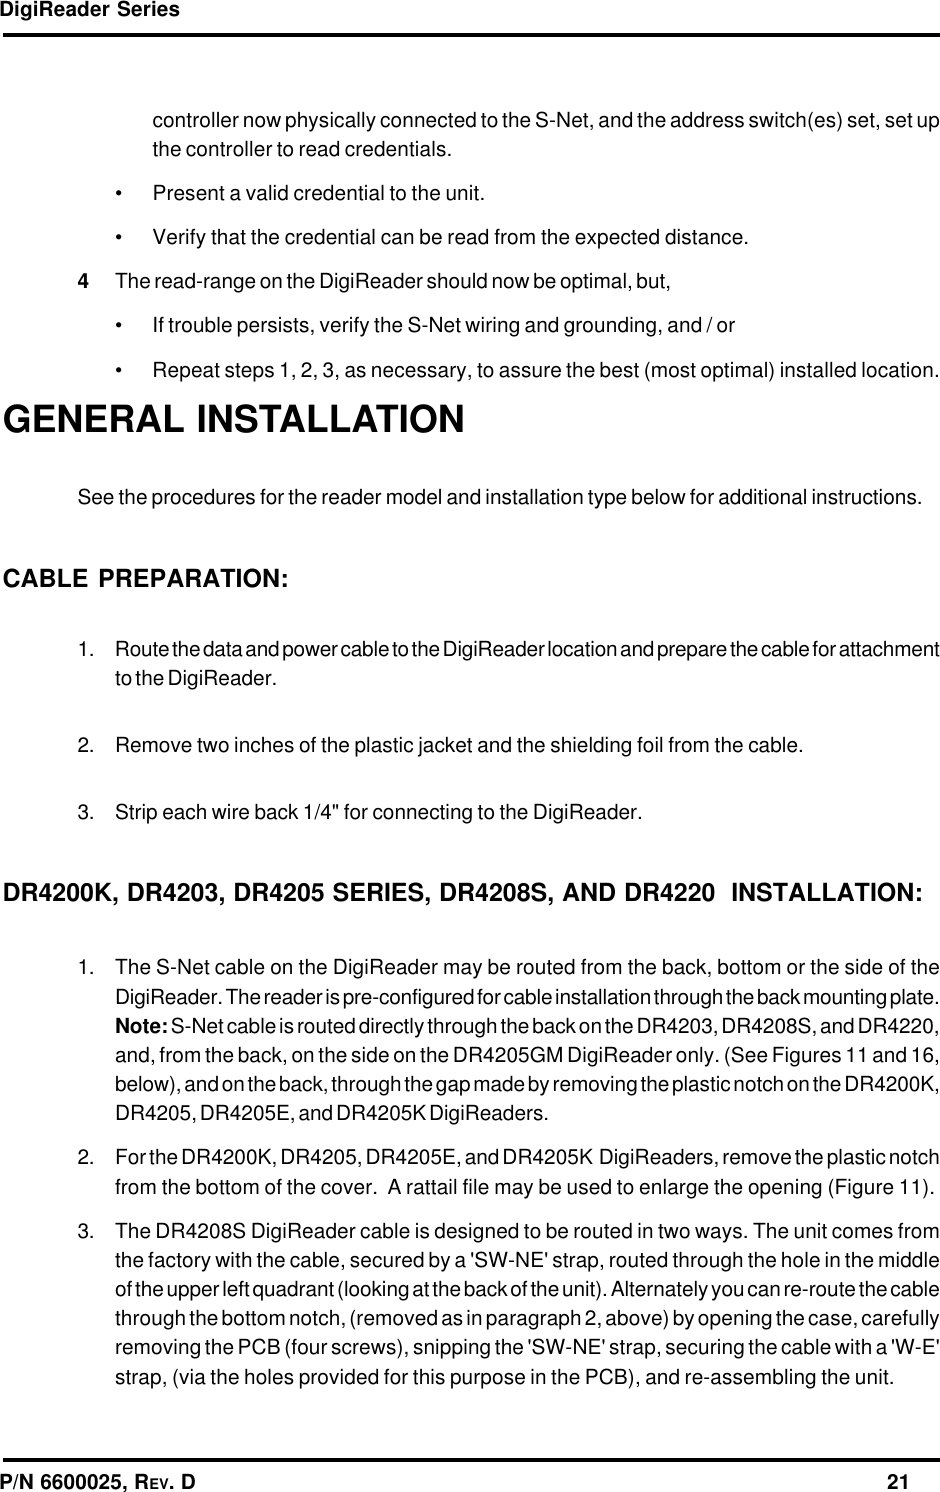 DigiReader SeriesP/N 6600025, REV. D                                                                                                              21GENERAL INSTALLATIONSee the procedures for the reader model and installation type below for additional instructions.CABLE PREPARATION:1. Route the data and power cable to the DigiReader location and prepare the cable for attachmentto the DigiReader.2. Remove two inches of the plastic jacket and the shielding foil from the cable.3. Strip each wire back 1/4&quot; for connecting to the DigiReader.DR4200K, DR4203, DR4205 SERIES, DR4208S, AND DR4220  INSTALLATION:1. The S-Net cable on the DigiReader may be routed from the back, bottom or the side of theDigiReader. The reader is pre-configured for cable installation through the back mounting plate.Note: S-Net cable is routed directly through the back on the DR4203, DR4208S, and DR4220,and, from the back, on the side on the DR4205GM DigiReader only. (See Figures 11 and 16,below), and on the back, through the gap made by removing the plastic notch on the DR4200K,DR4205, DR4205E, and DR4205K DigiReaders.2. For the DR4200K, DR4205, DR4205E, and DR4205K  DigiReaders, remove the plastic notchfrom the bottom of the cover.  A rattail file may be used to enlarge the opening (Figure 11).3. The DR4208S DigiReader cable is designed to be routed in two ways. The unit comes fromthe factory with the cable, secured by a &apos;SW-NE&apos; strap, routed through the hole in the middleof the upper left quadrant (looking at the back of the unit). Alternately you can re-route the cablethrough the bottom notch, (removed as in paragraph 2, above) by opening the case, carefullyremoving the PCB (four screws), snipping the &apos;SW-NE&apos; strap, securing the cable with a &apos;W-E&apos;strap, (via the holes provided for this purpose in the PCB), and re-assembling the unit.controller now physically connected to the S-Net, and the address switch(es) set, set upthe controller to read credentials.• Present a valid credential to the unit.• Verify that the credential can be read from the expected distance.4The read-range on the DigiReader should now be optimal, but,• If trouble persists, verify the S-Net wiring and grounding, and / or• Repeat steps 1, 2, 3, as necessary, to assure the best (most optimal) installed location.